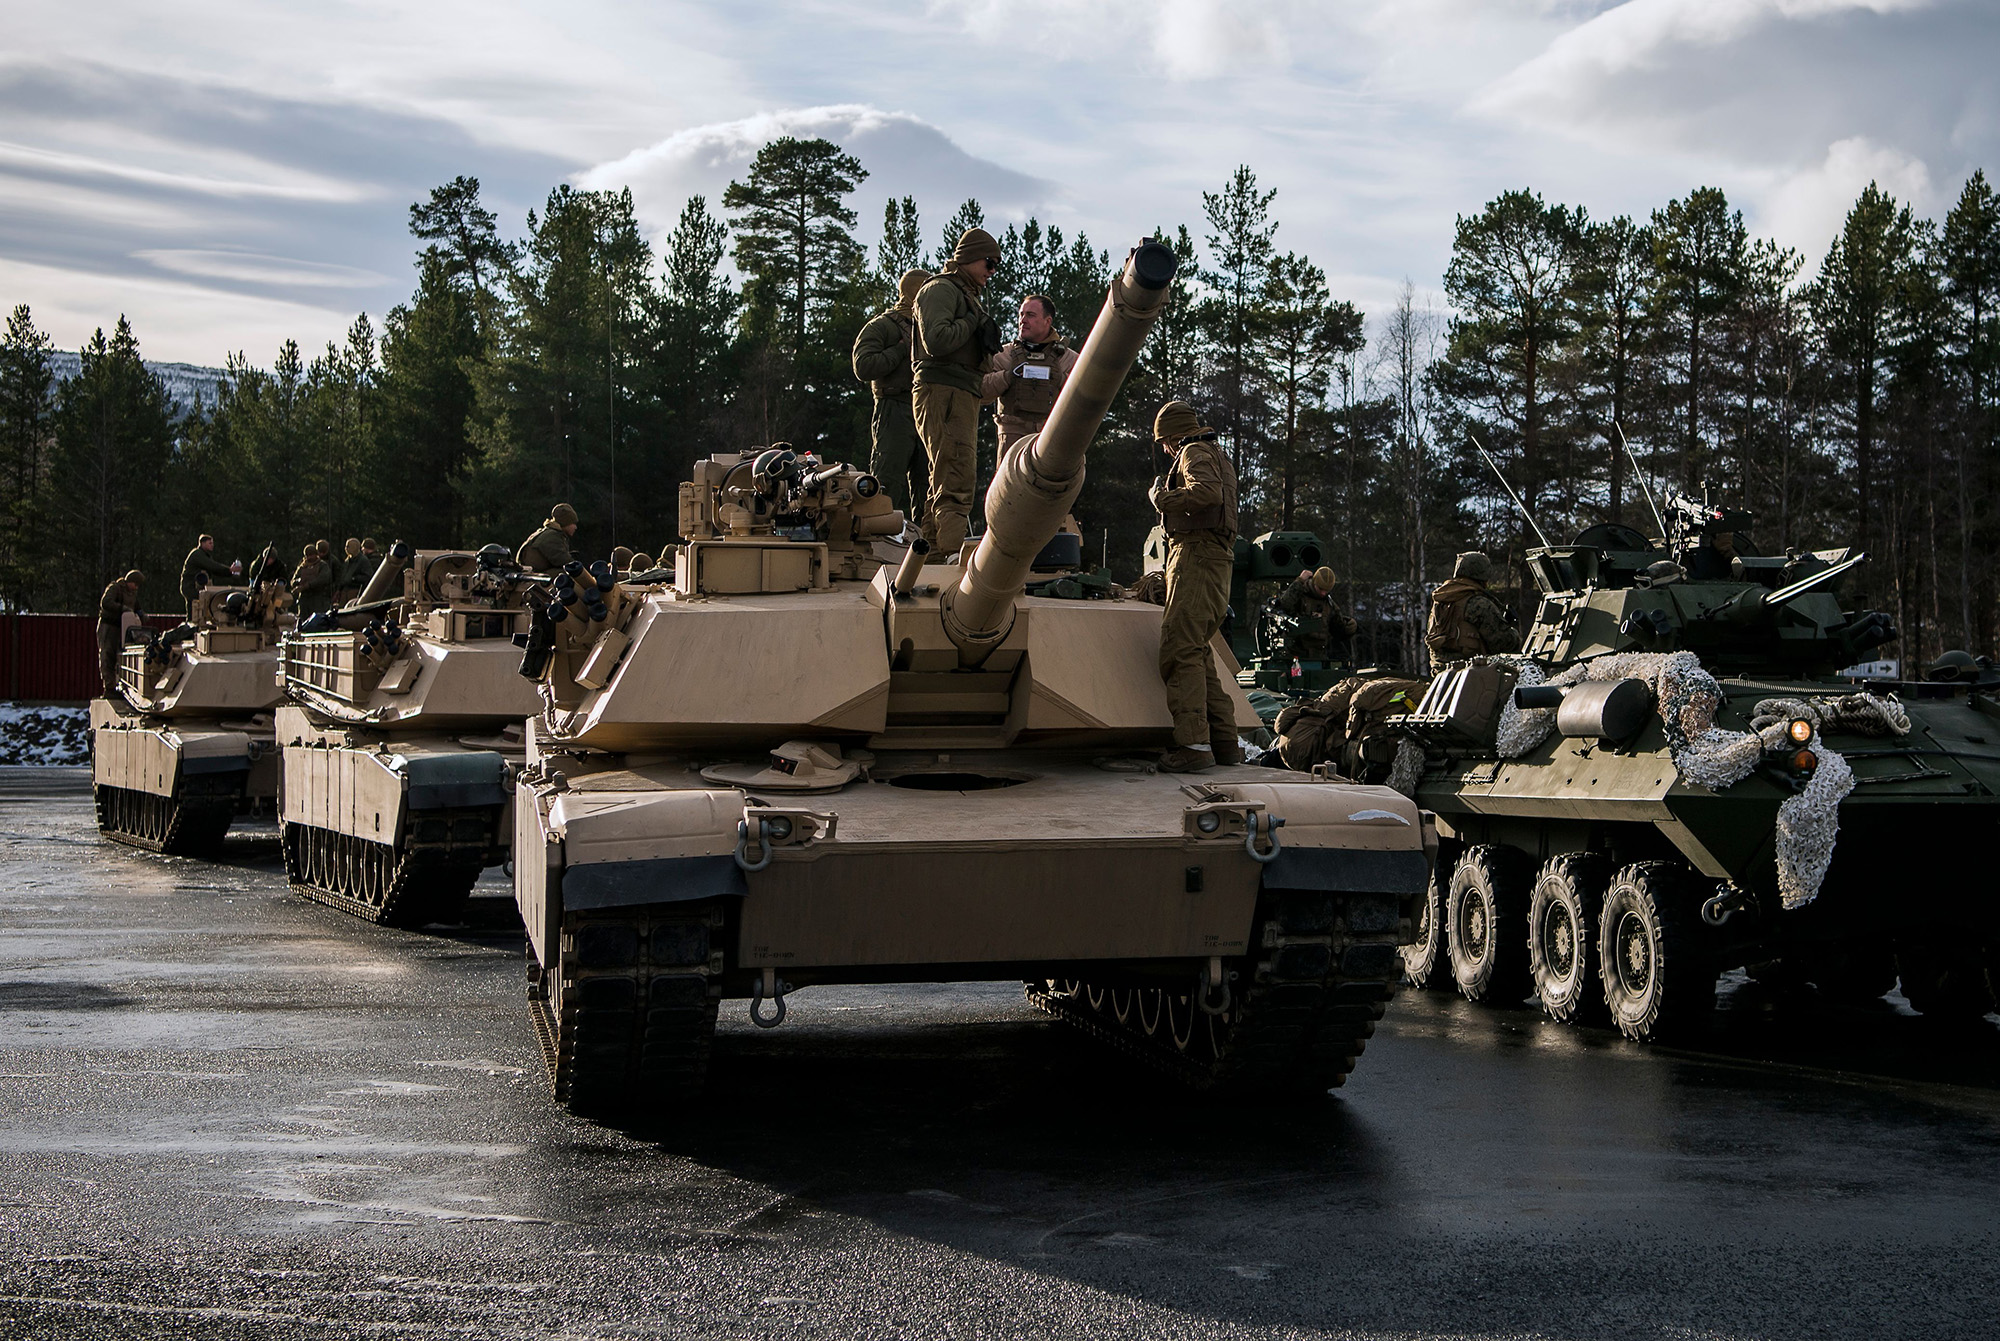 M1 Abrams tanks, left, during an exercise near the town of Oppdal, Norway in 2018.